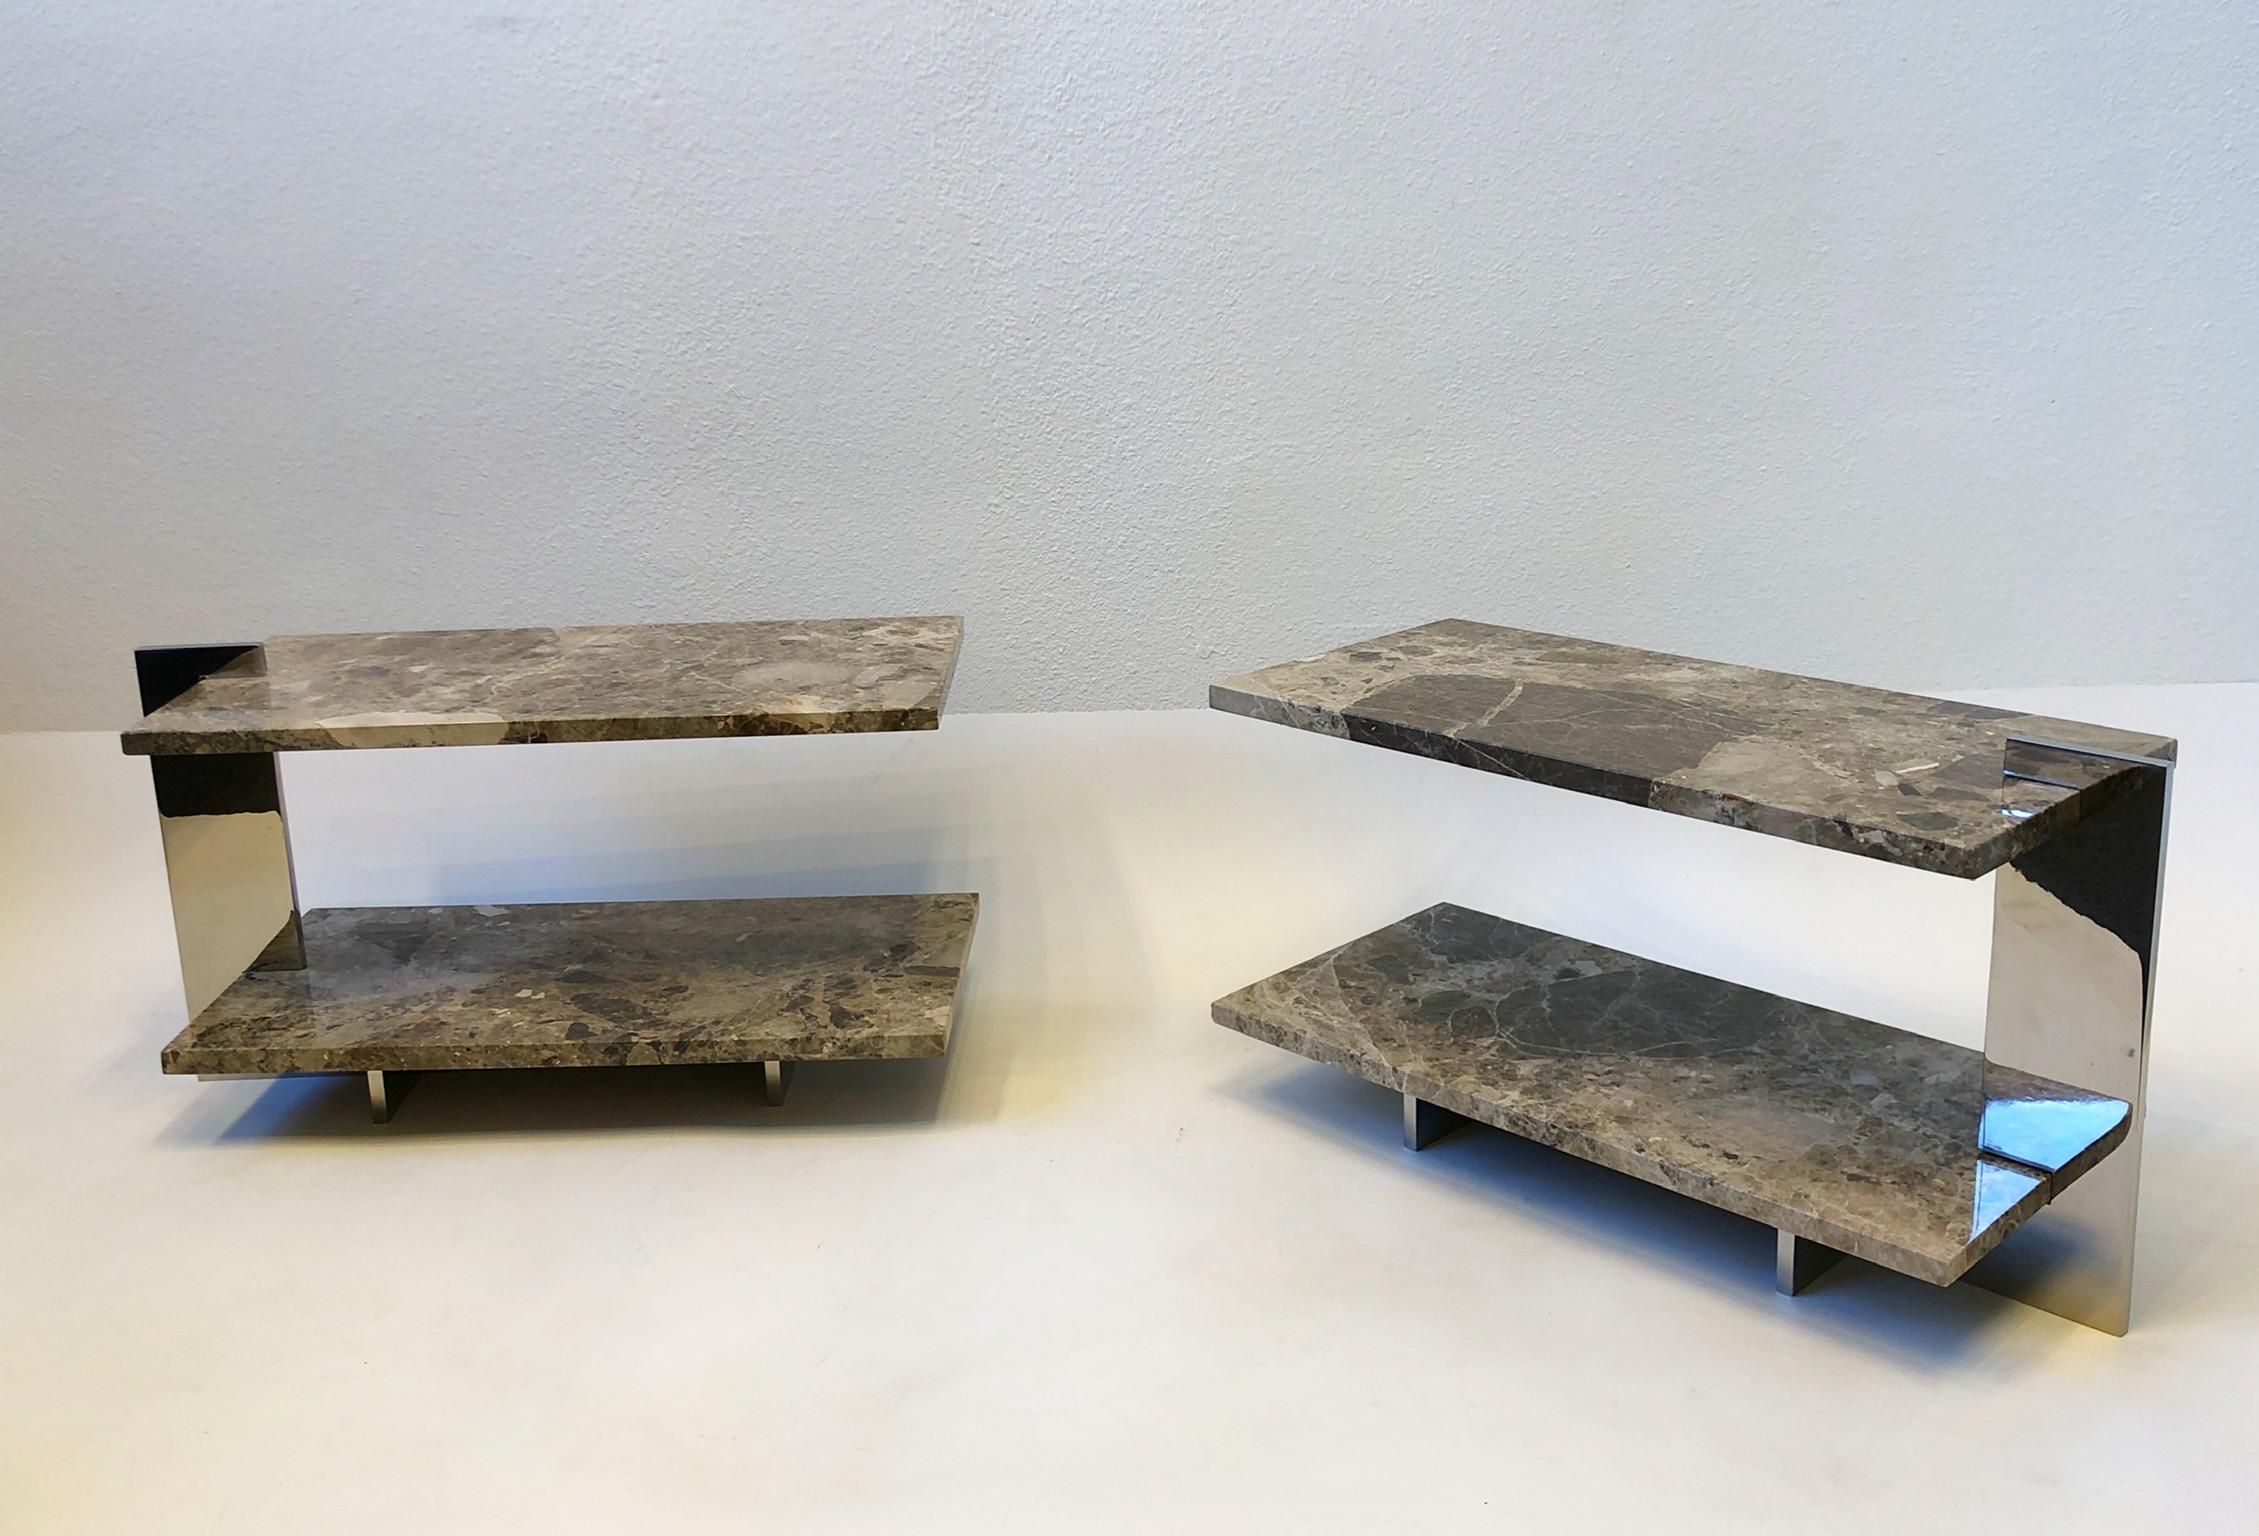 Amazing pair of two tier marble and polish stainless steel side tables. 
The marble piece just sit on the frame. 
In good condition, with minor wear consistent with age. 
Measurements: 12” Deep 26” Wide, 13.75” High to top tier, 3.75” High lower